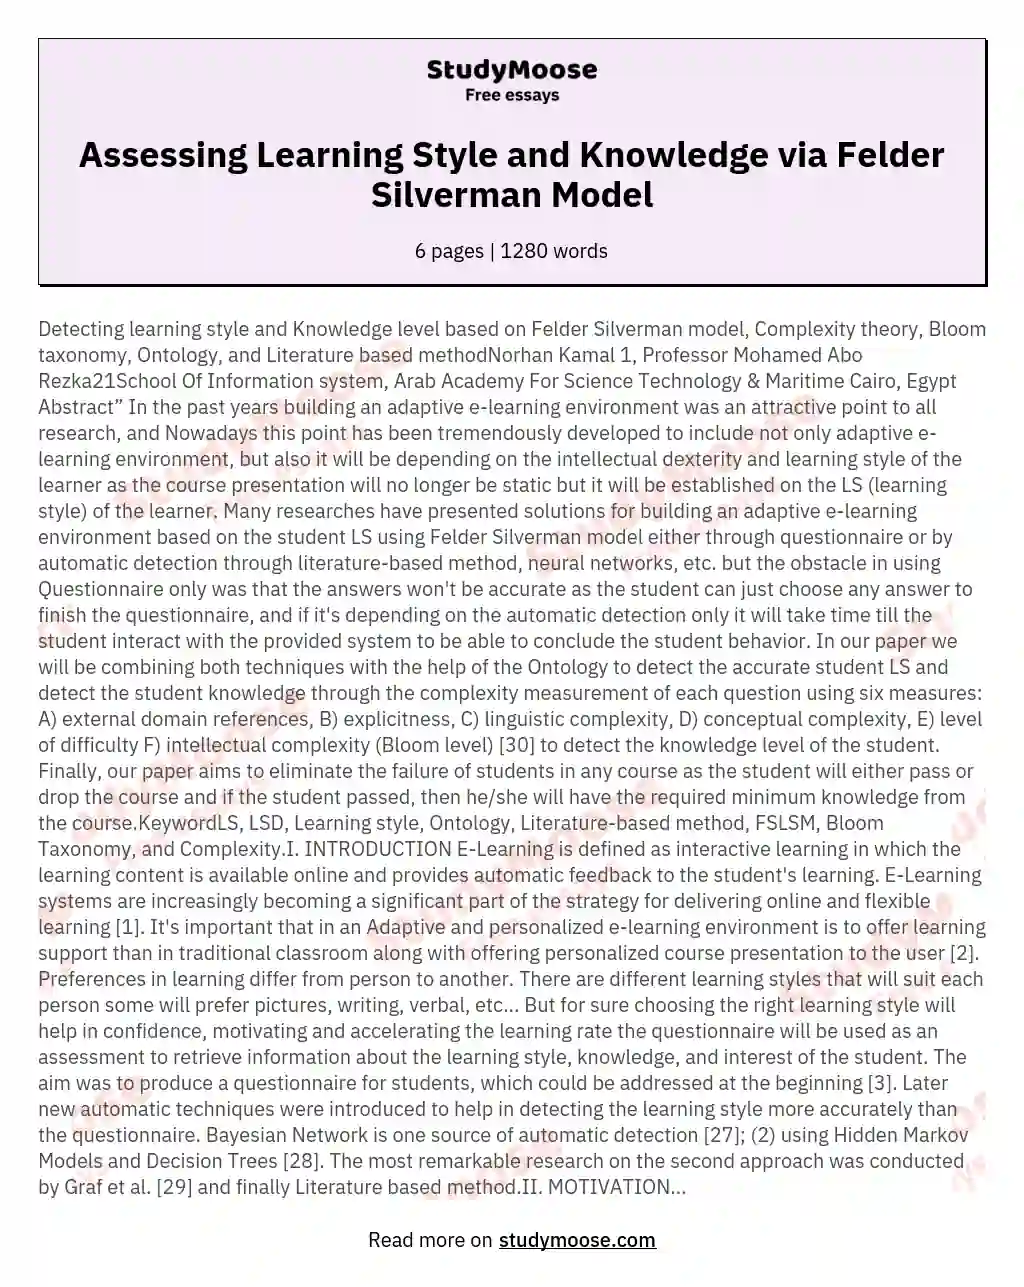 Assessing Learning Style and Knowledge via Felder Silverman Model essay